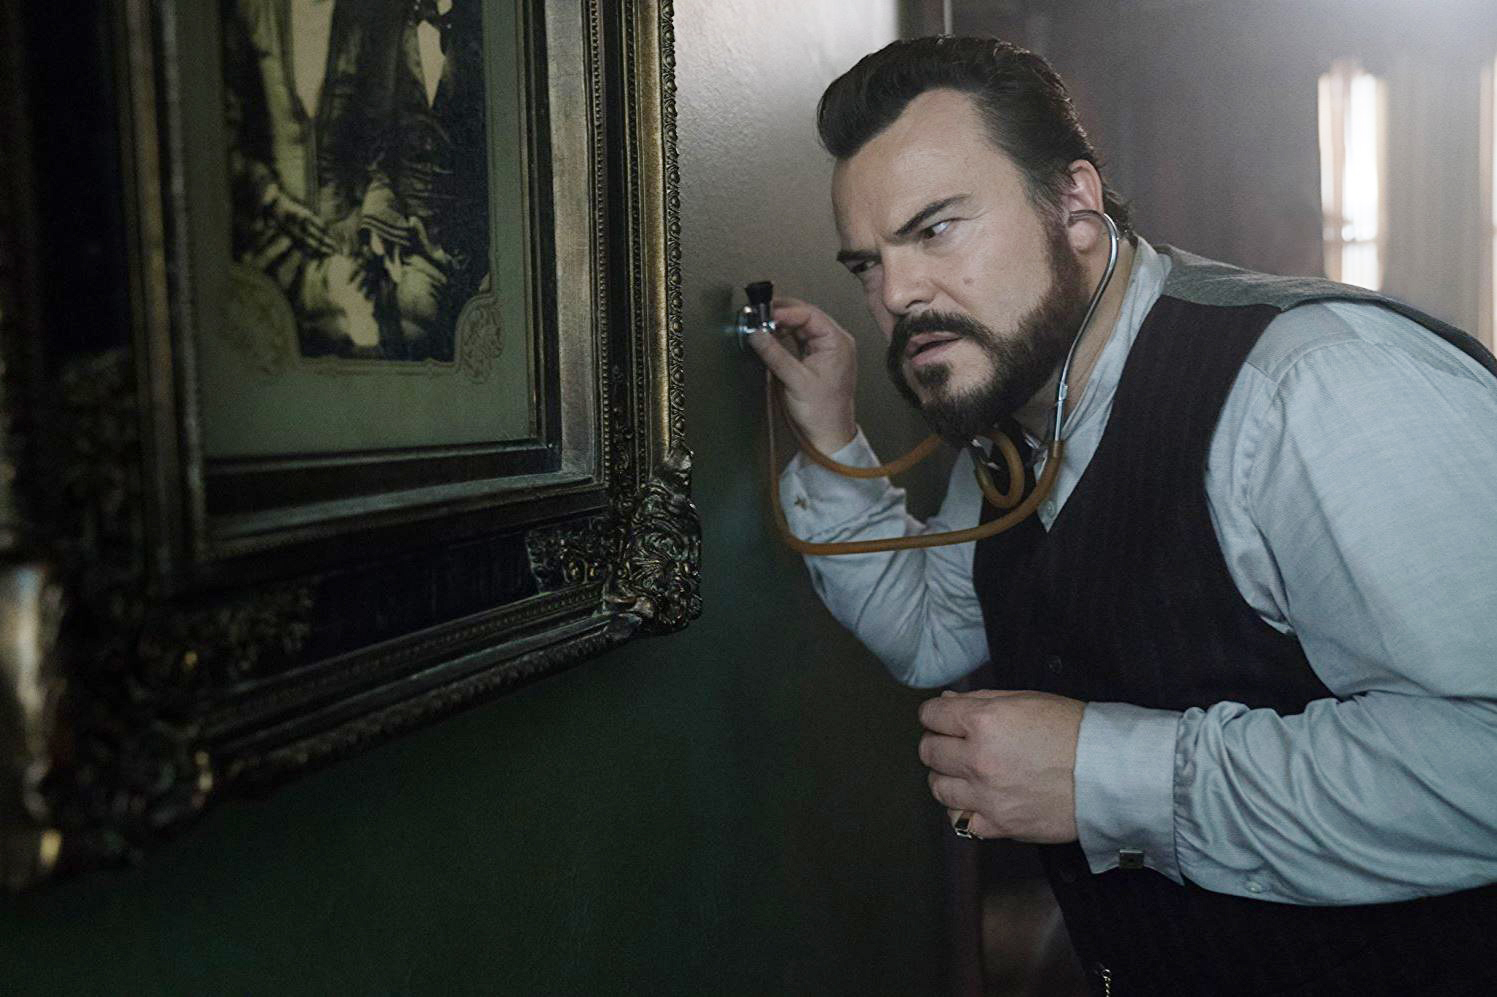 PHOTO: Jack Black in a scene from "The House with a Clock in It's Walls."